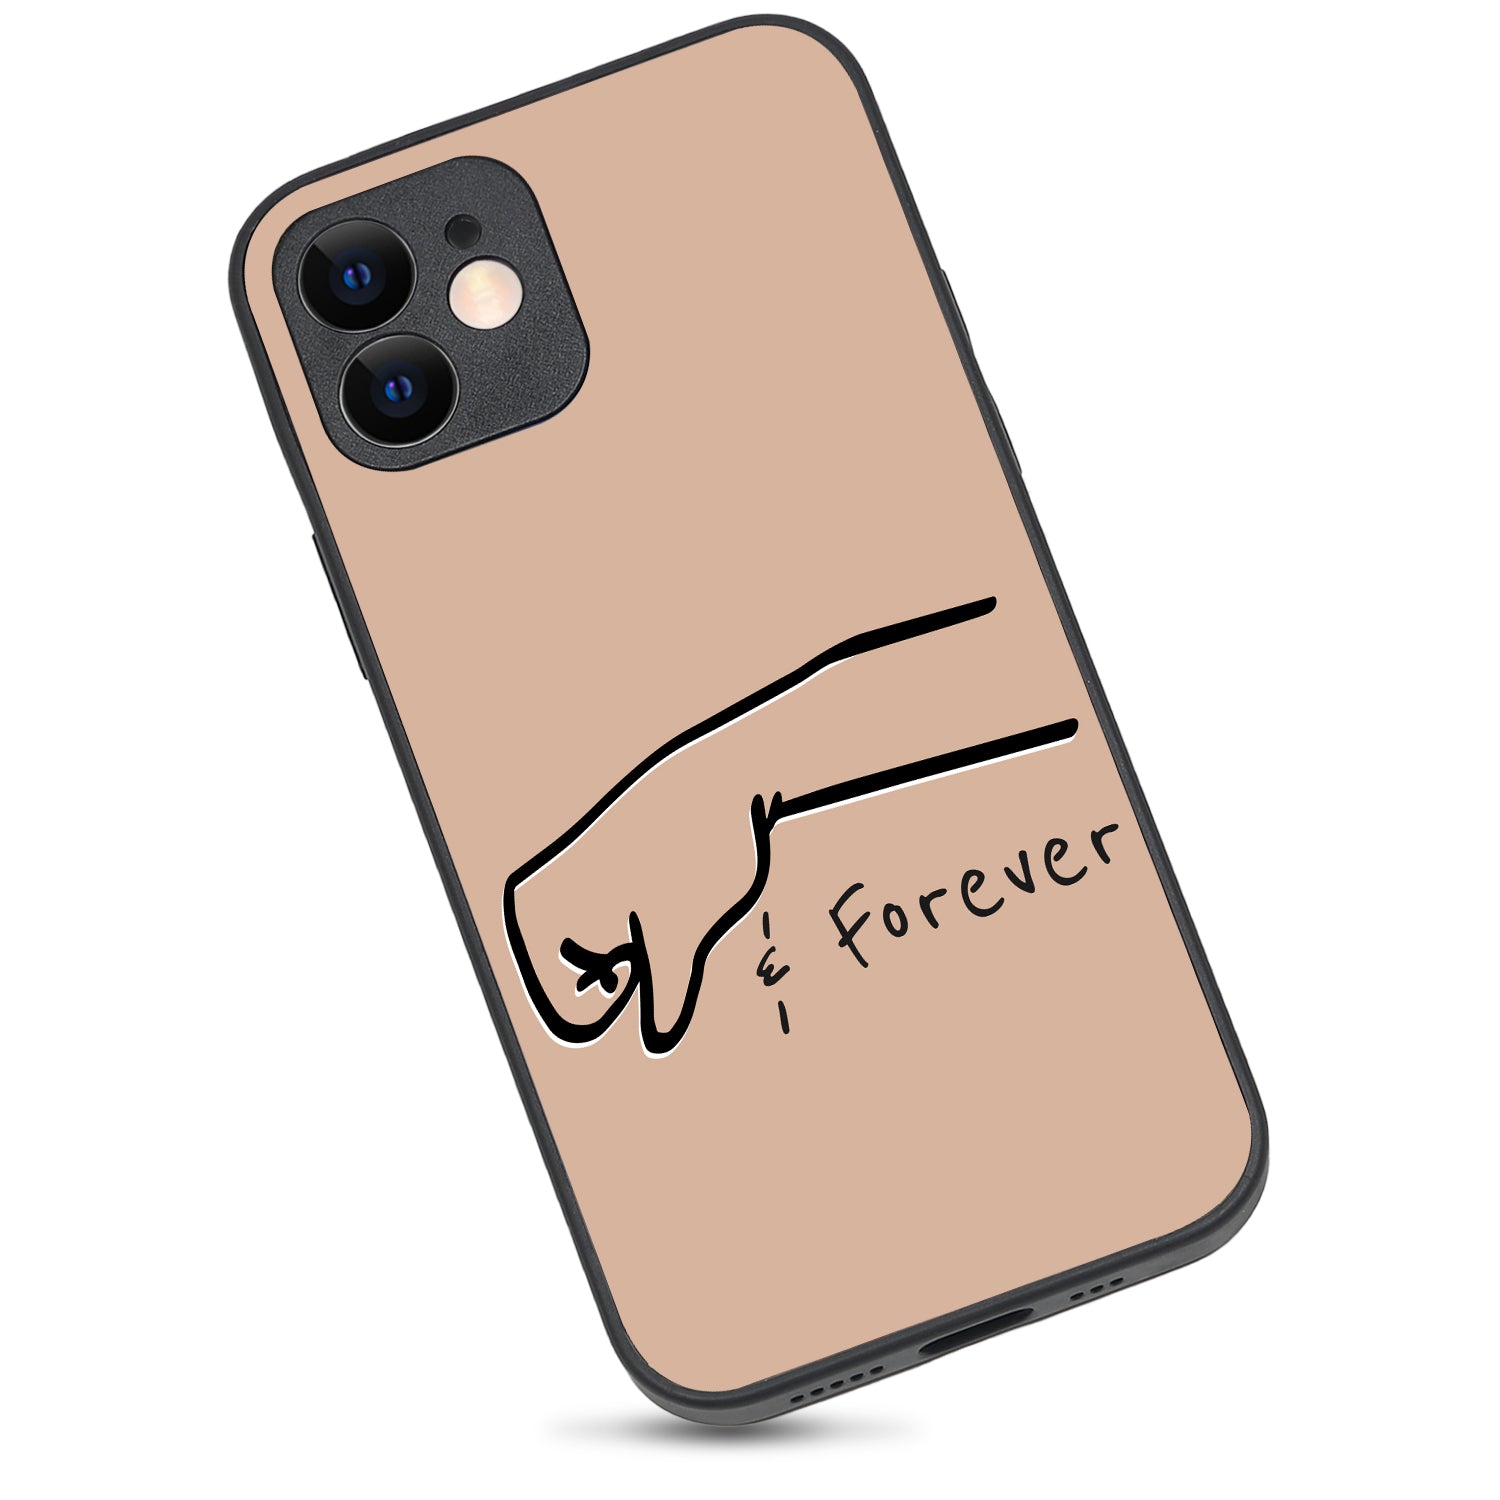 Forever Bff iPhone 12 Case